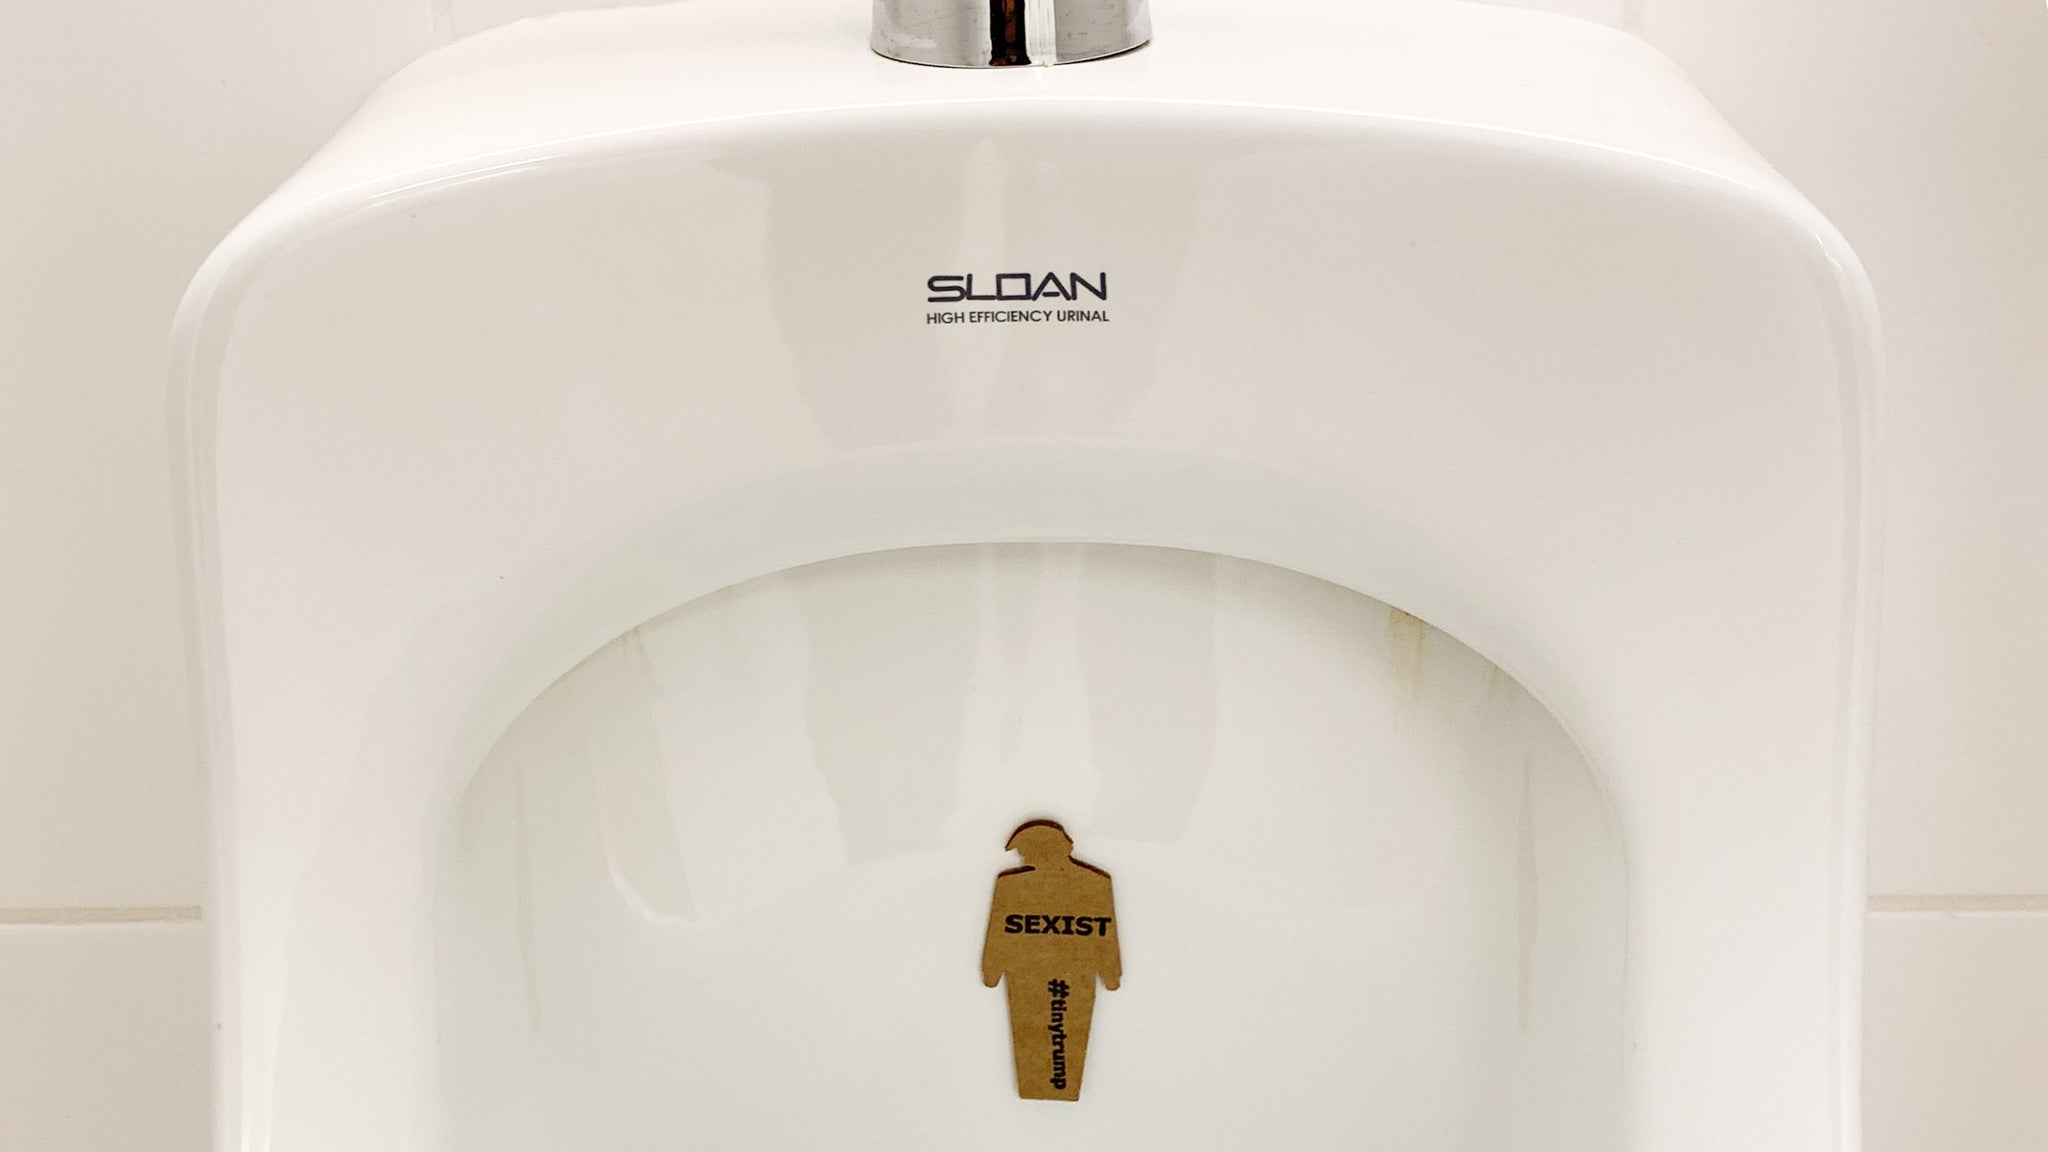 tiny trump with the slogan "Sexist" stuck to a urinal